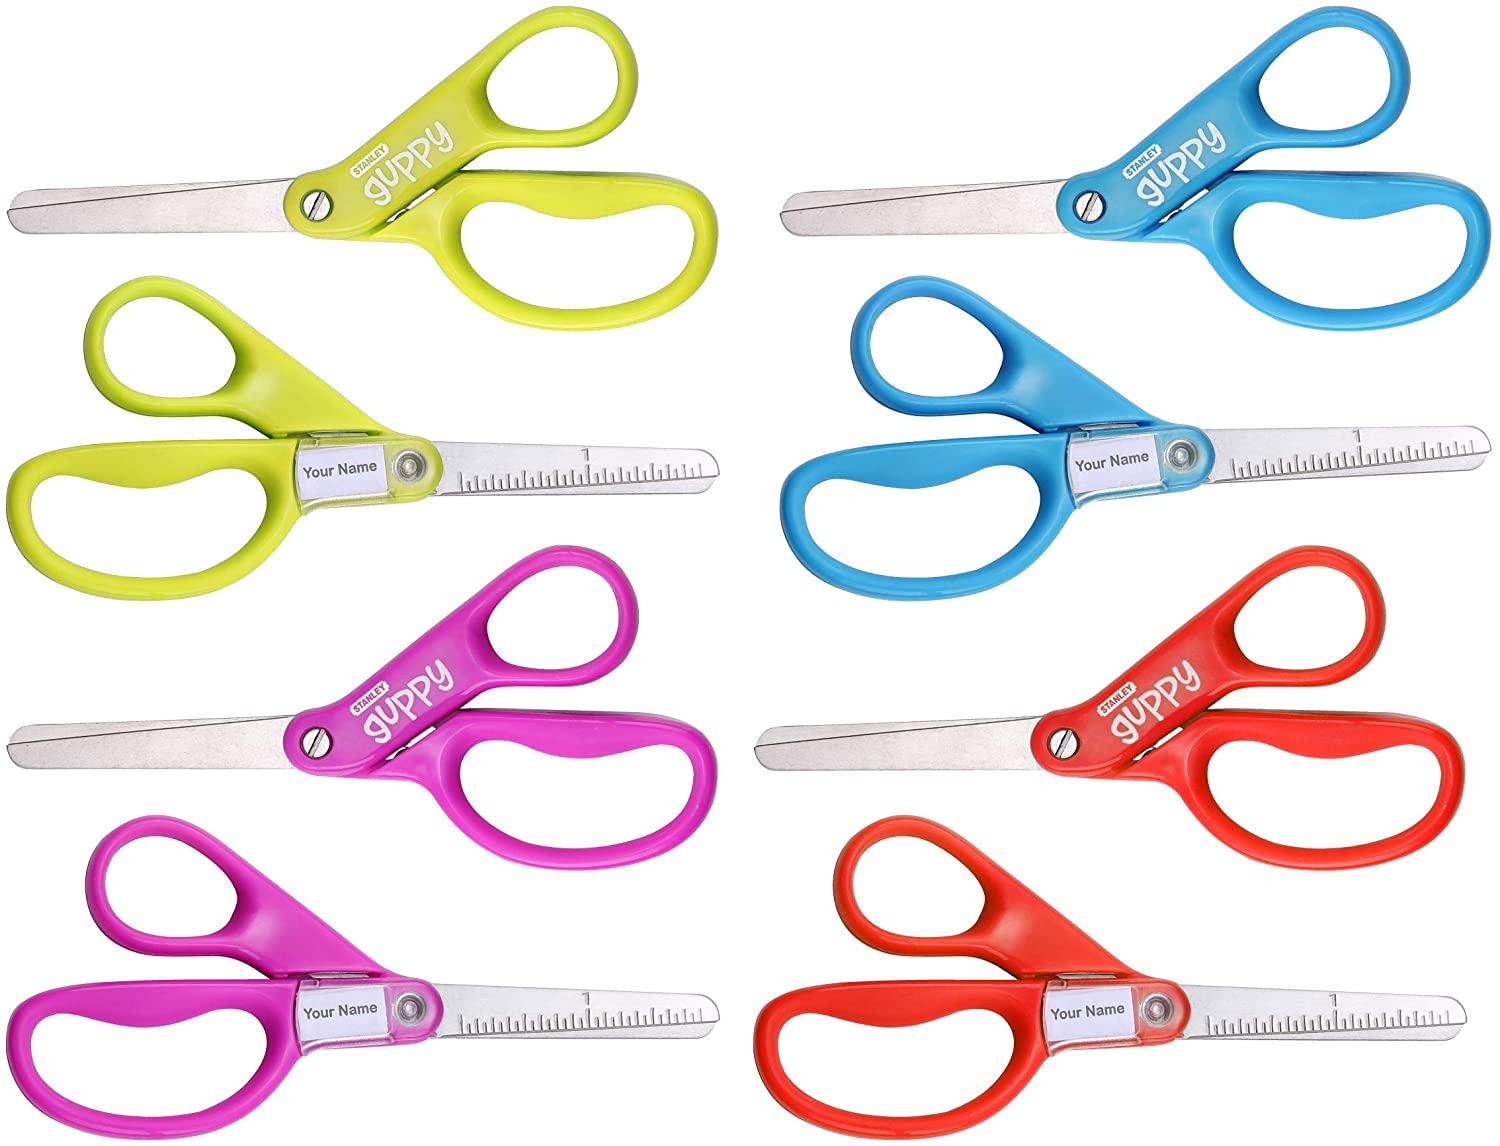 8 Stanley Minnow 5in Pointed Tip Kids Scissors for $4.48